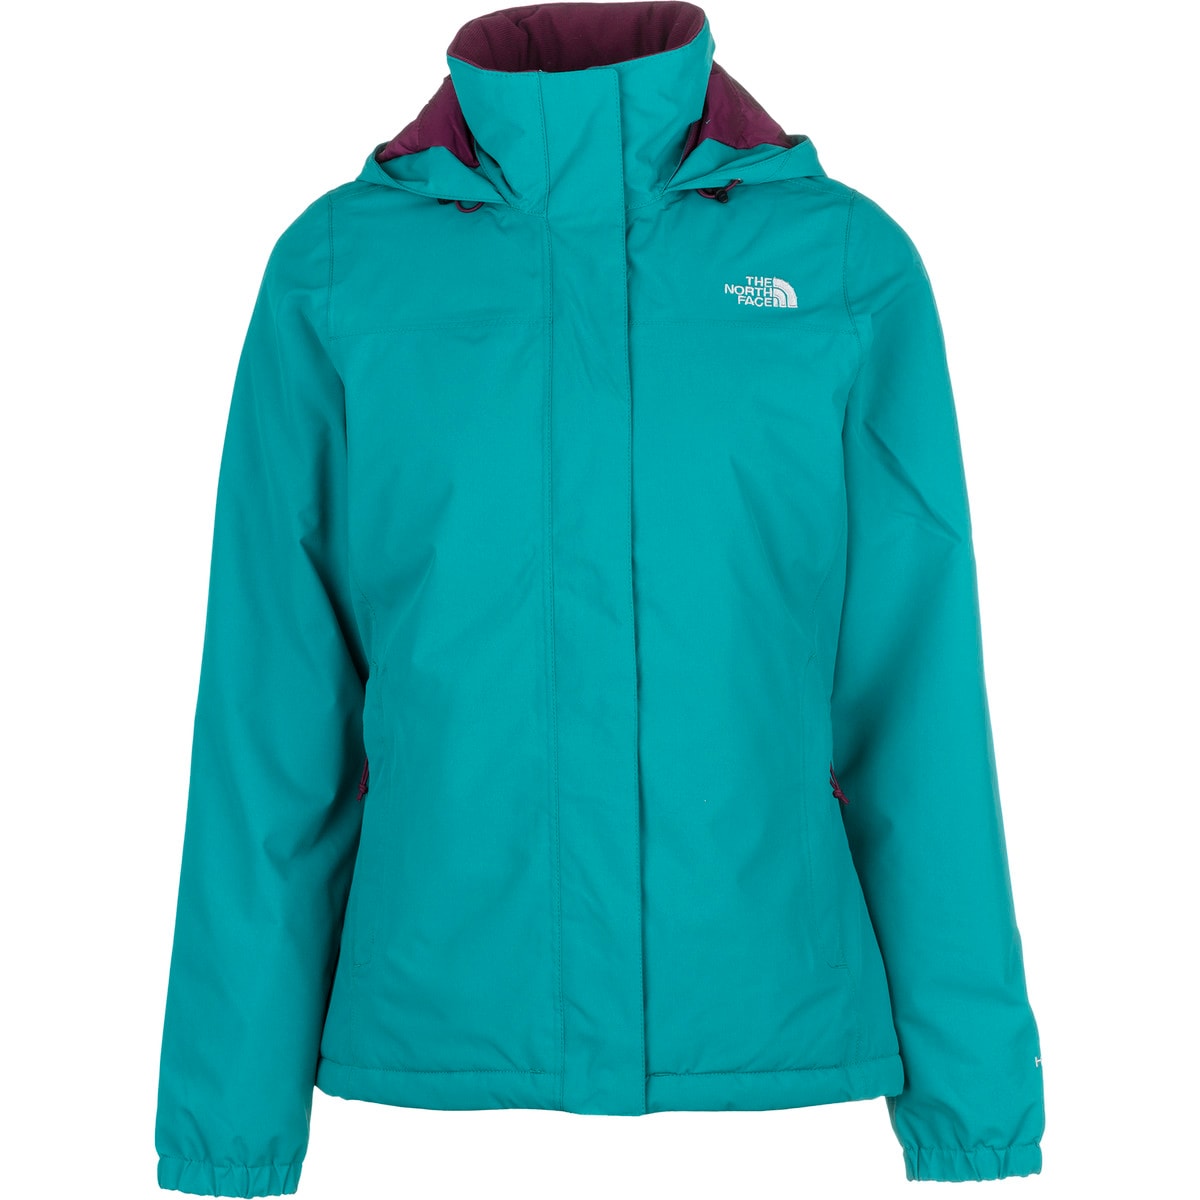 The North Face Resolve Insulated Jacket - Trailspace.com